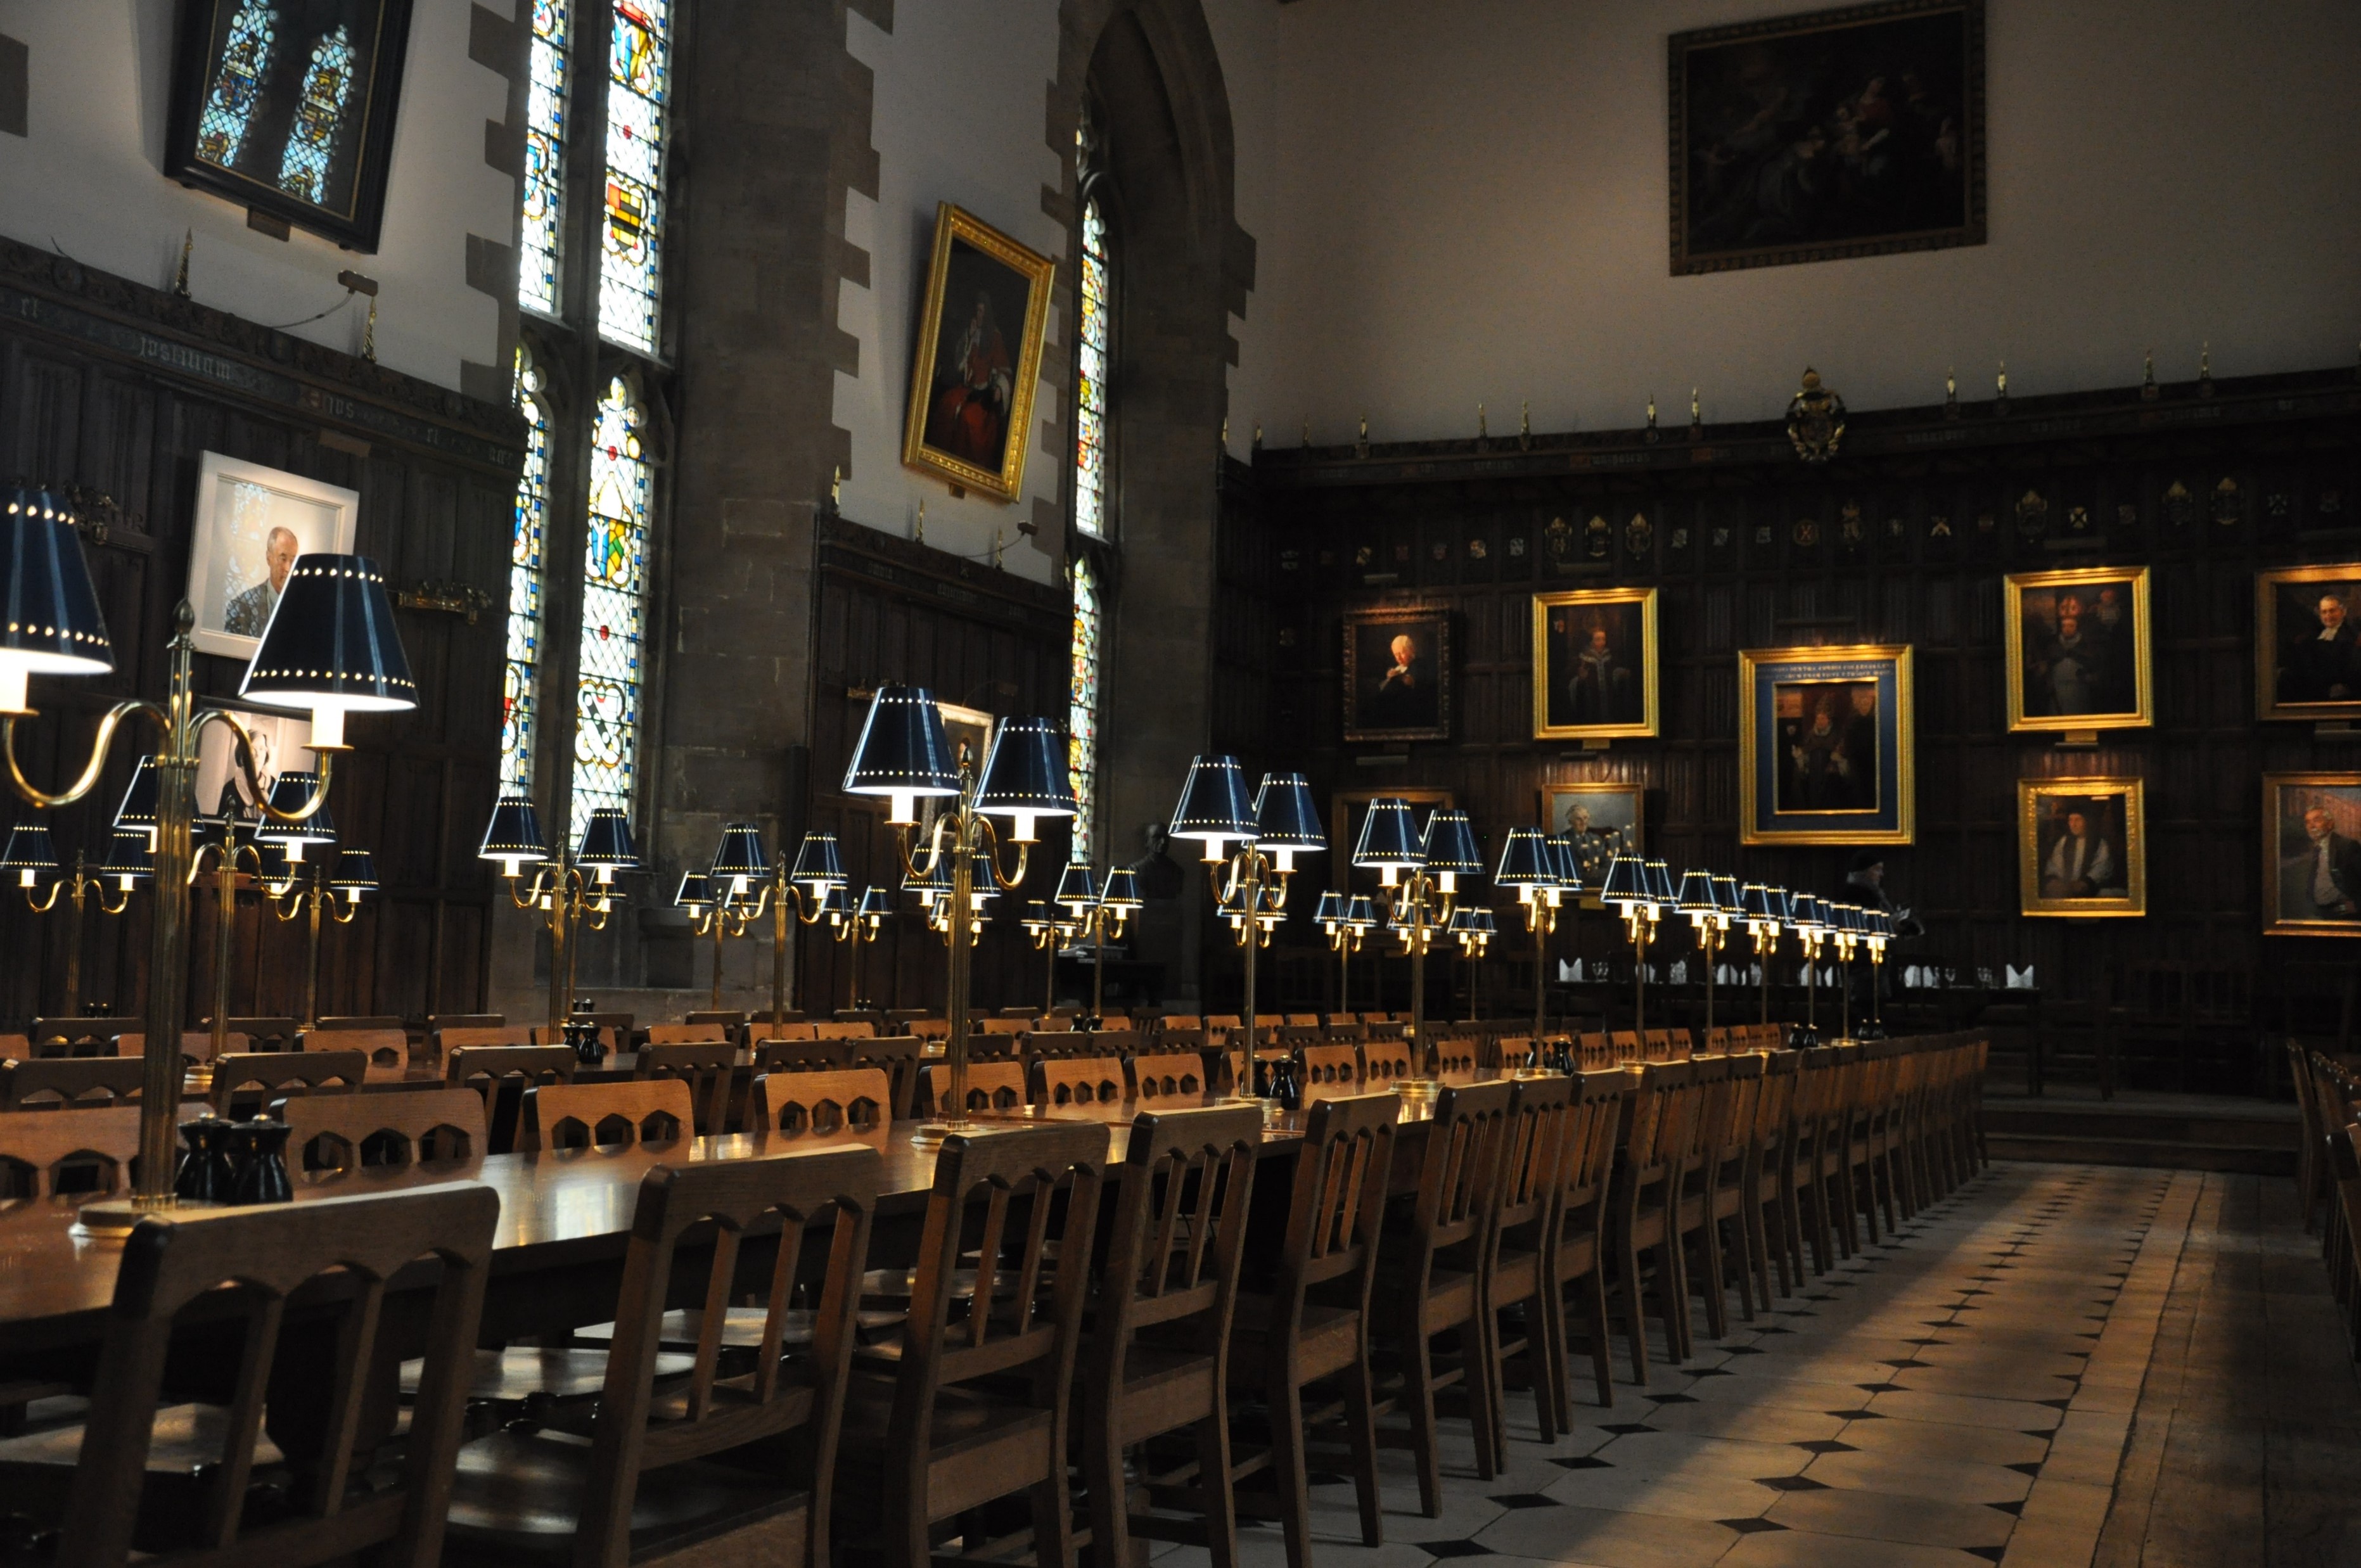 Dining Hall, including lights with blue lampshades, and paintings on the walls